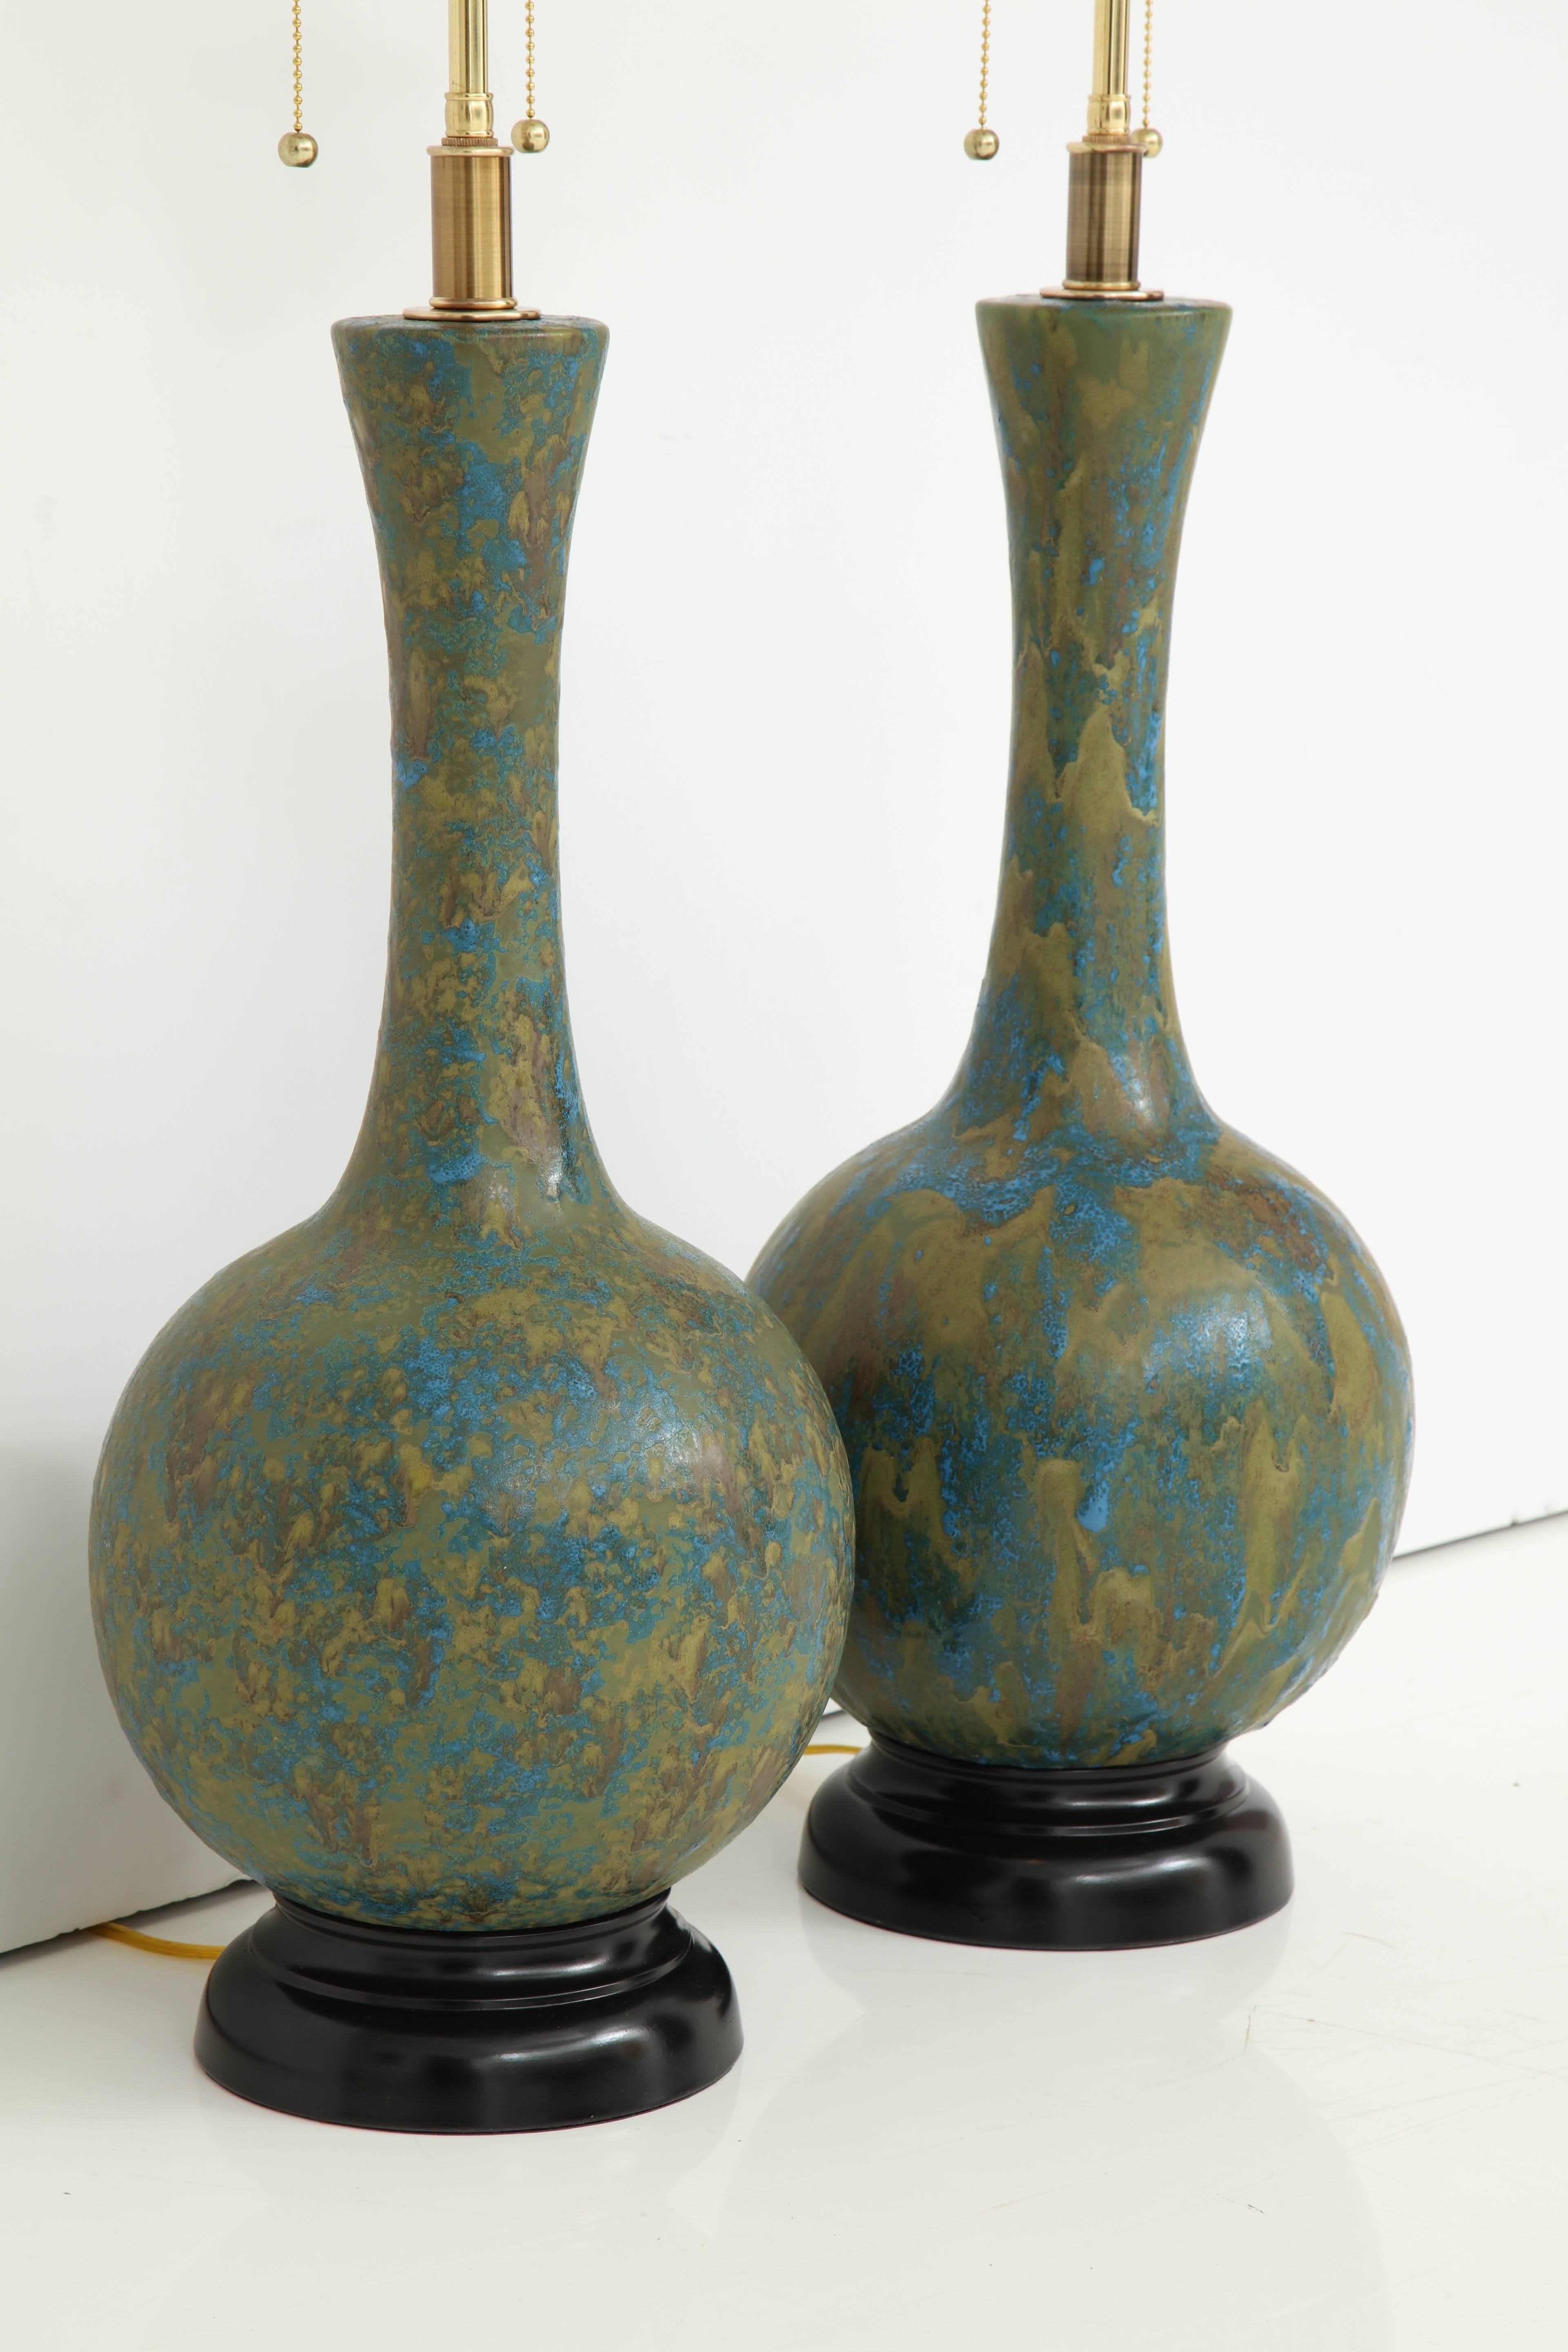 Pair of 1960s Italian Mid Century ceramic lamps with a textured glazed finish.
The lamps have been newly rewired for the US with polished Brass double clusters that take standard light bulbs.
The overall height of the lamps to the finial is 34.5